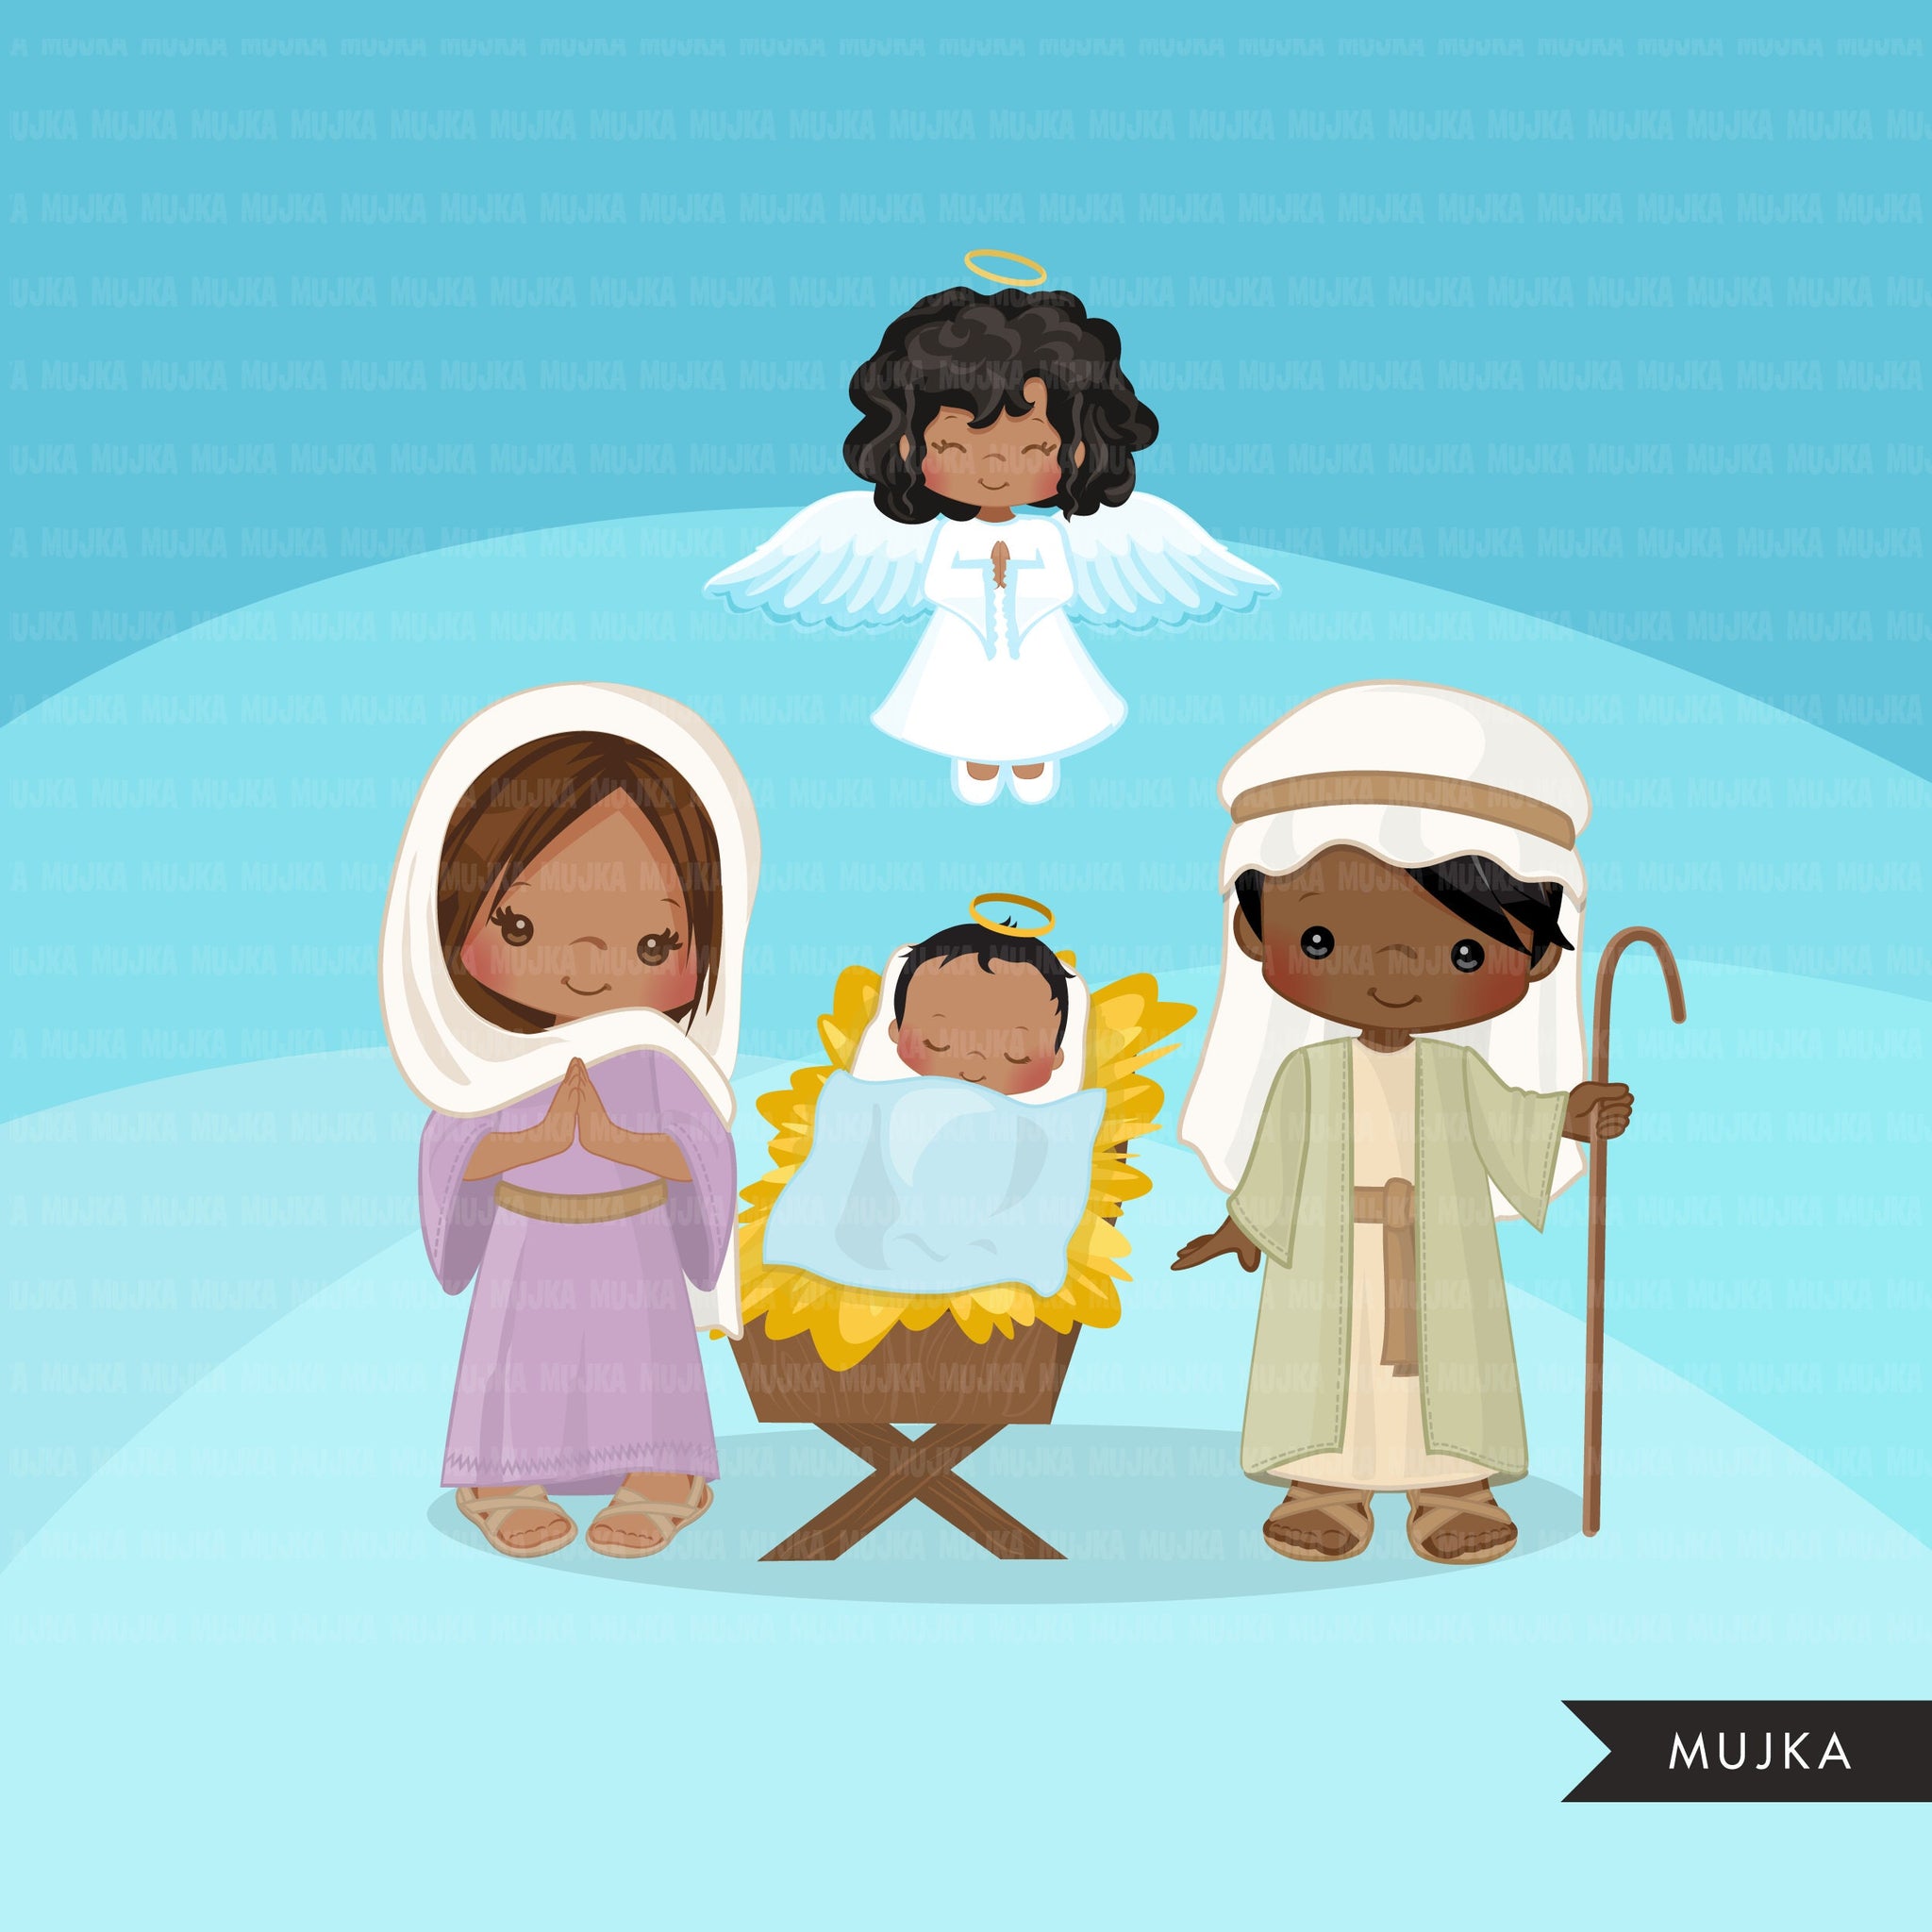 Nativity Clipart, black Jesus, Nativity png, religious illustration, Bible graphics, baby Jesus, Joseph and Mary, Angel, 3 kings, Christian